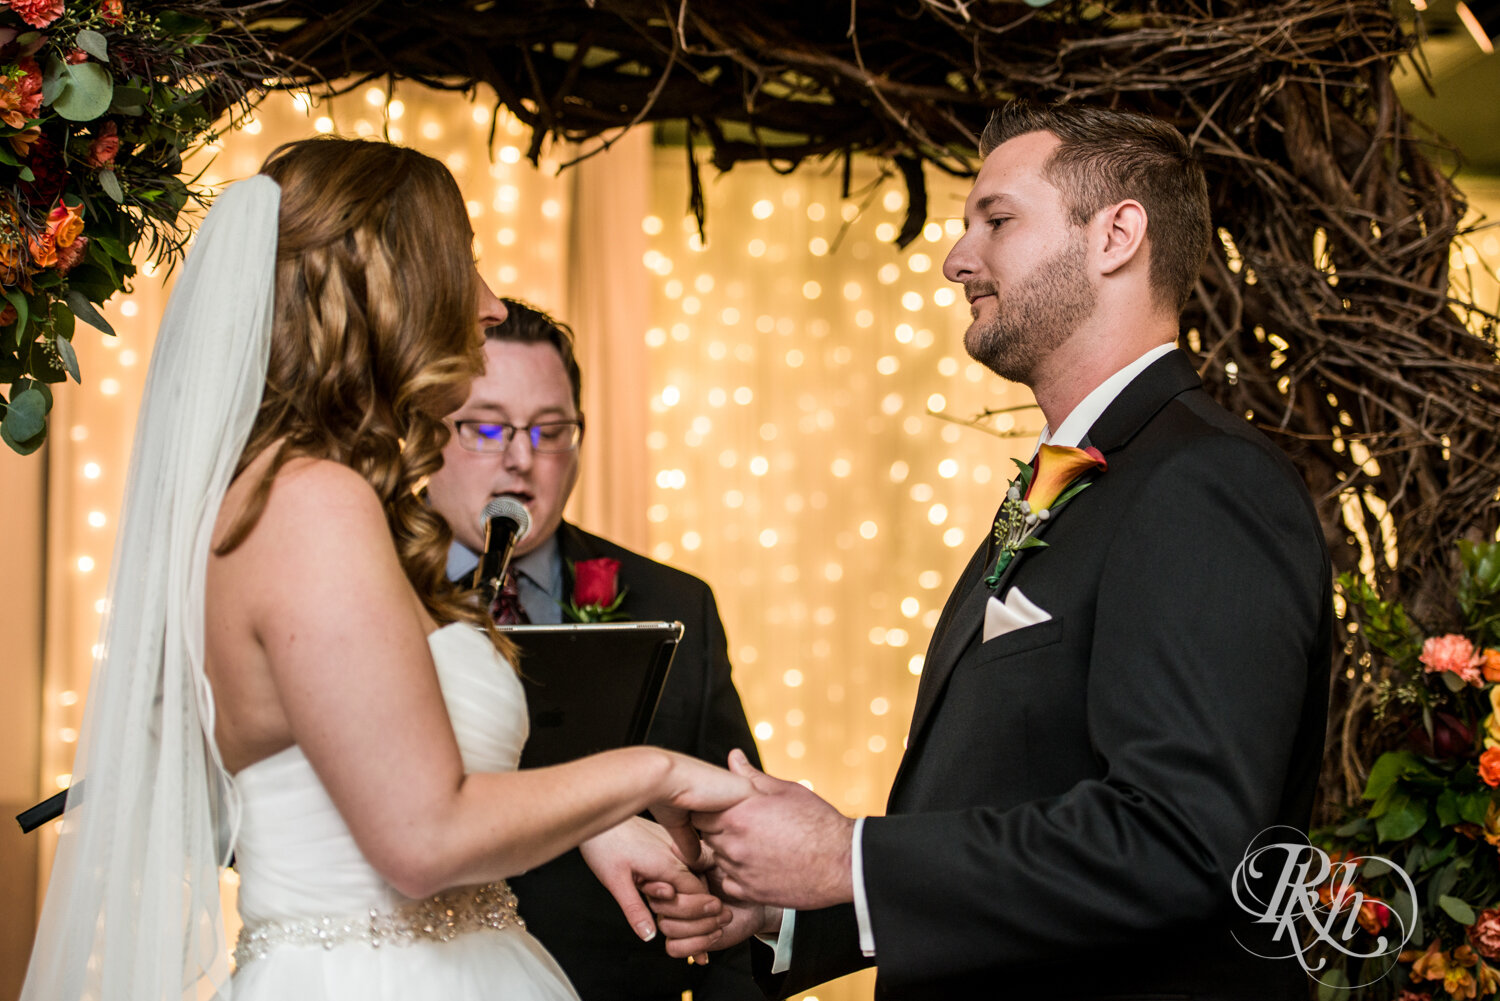 Bride and groom hold hands at indoor wedding ceremony at Rockwoods in Otsego, Minnesota.